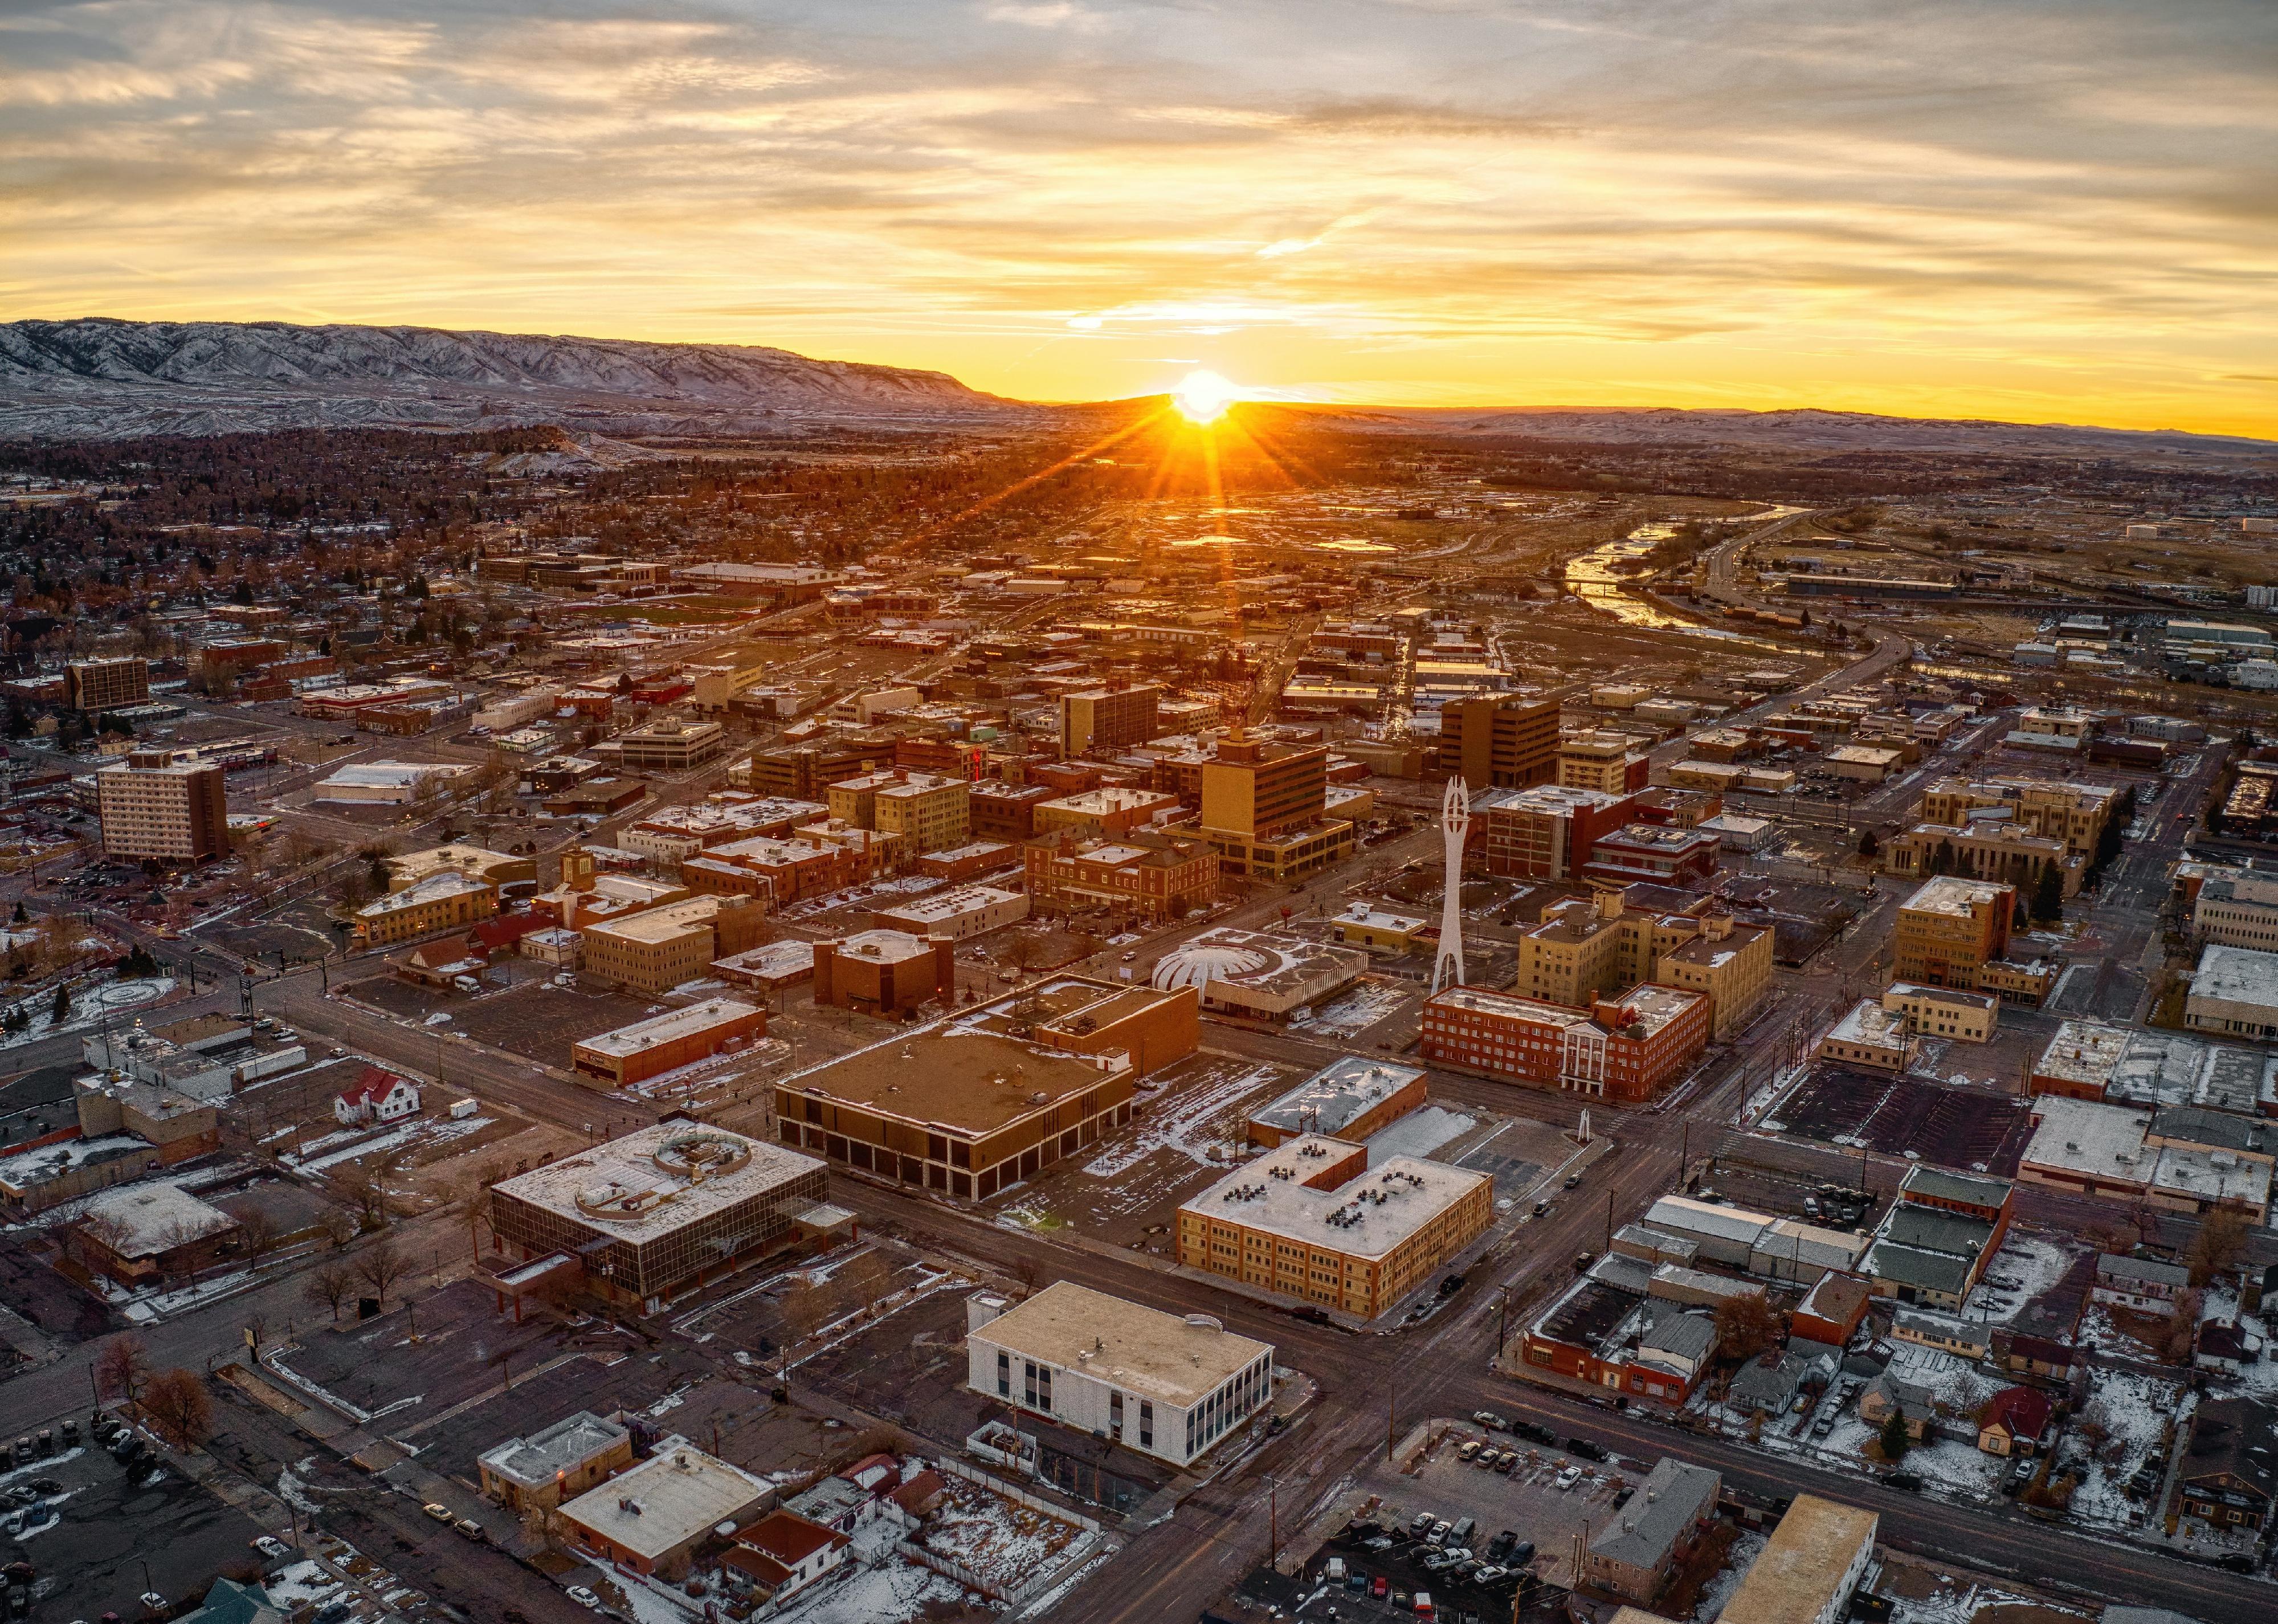 Aerial view of downtown Casper, Wyoming at dusk